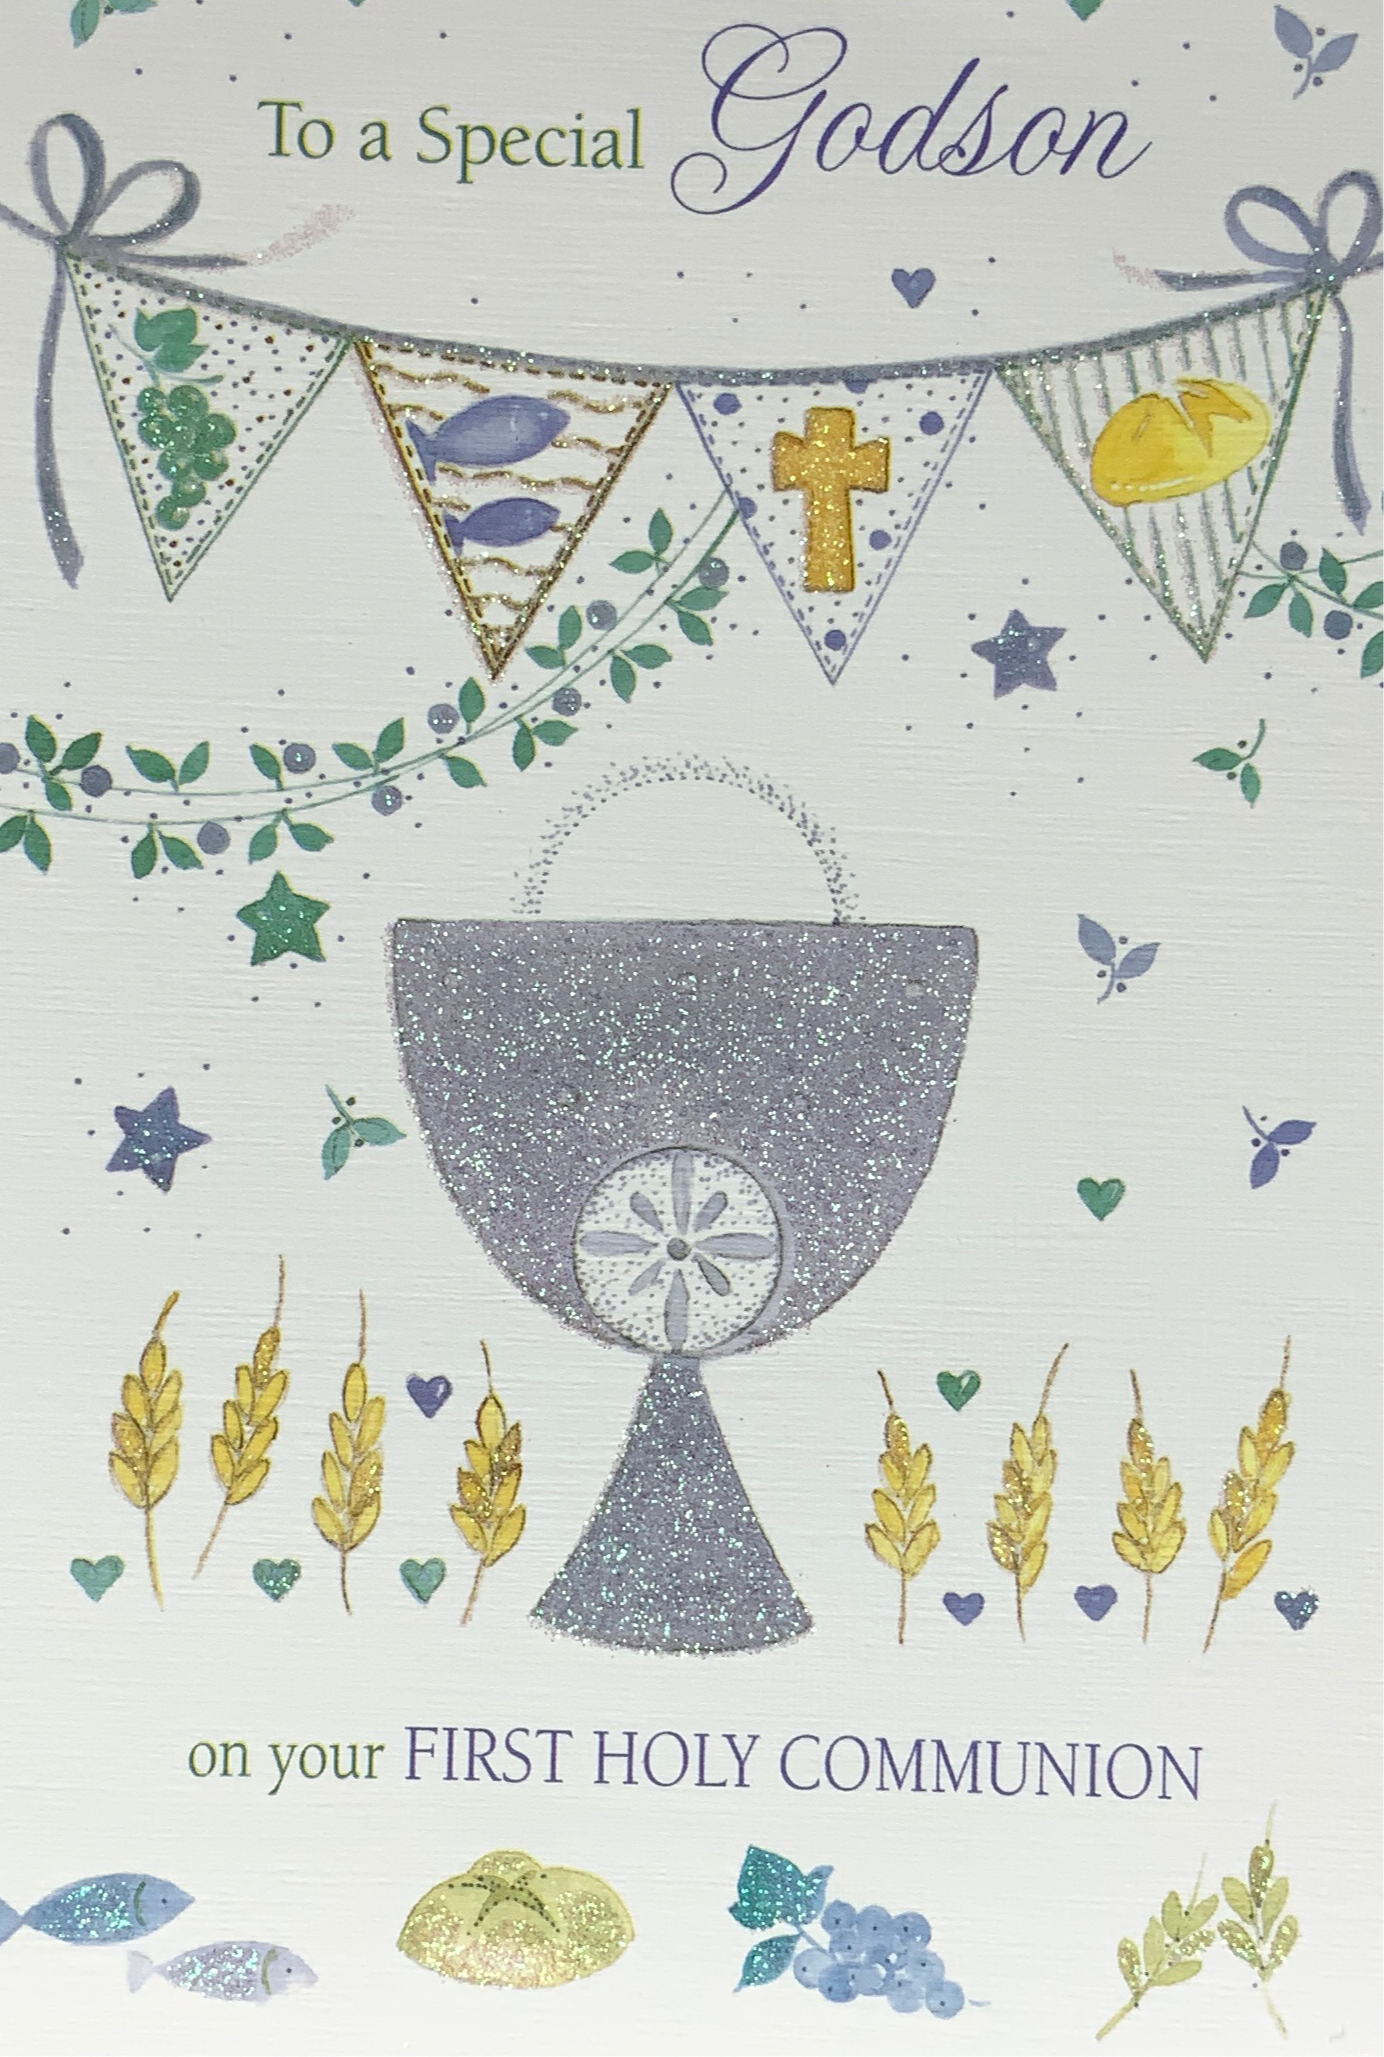 Communion Card - Godson / Congratulations On Your Very Special Day